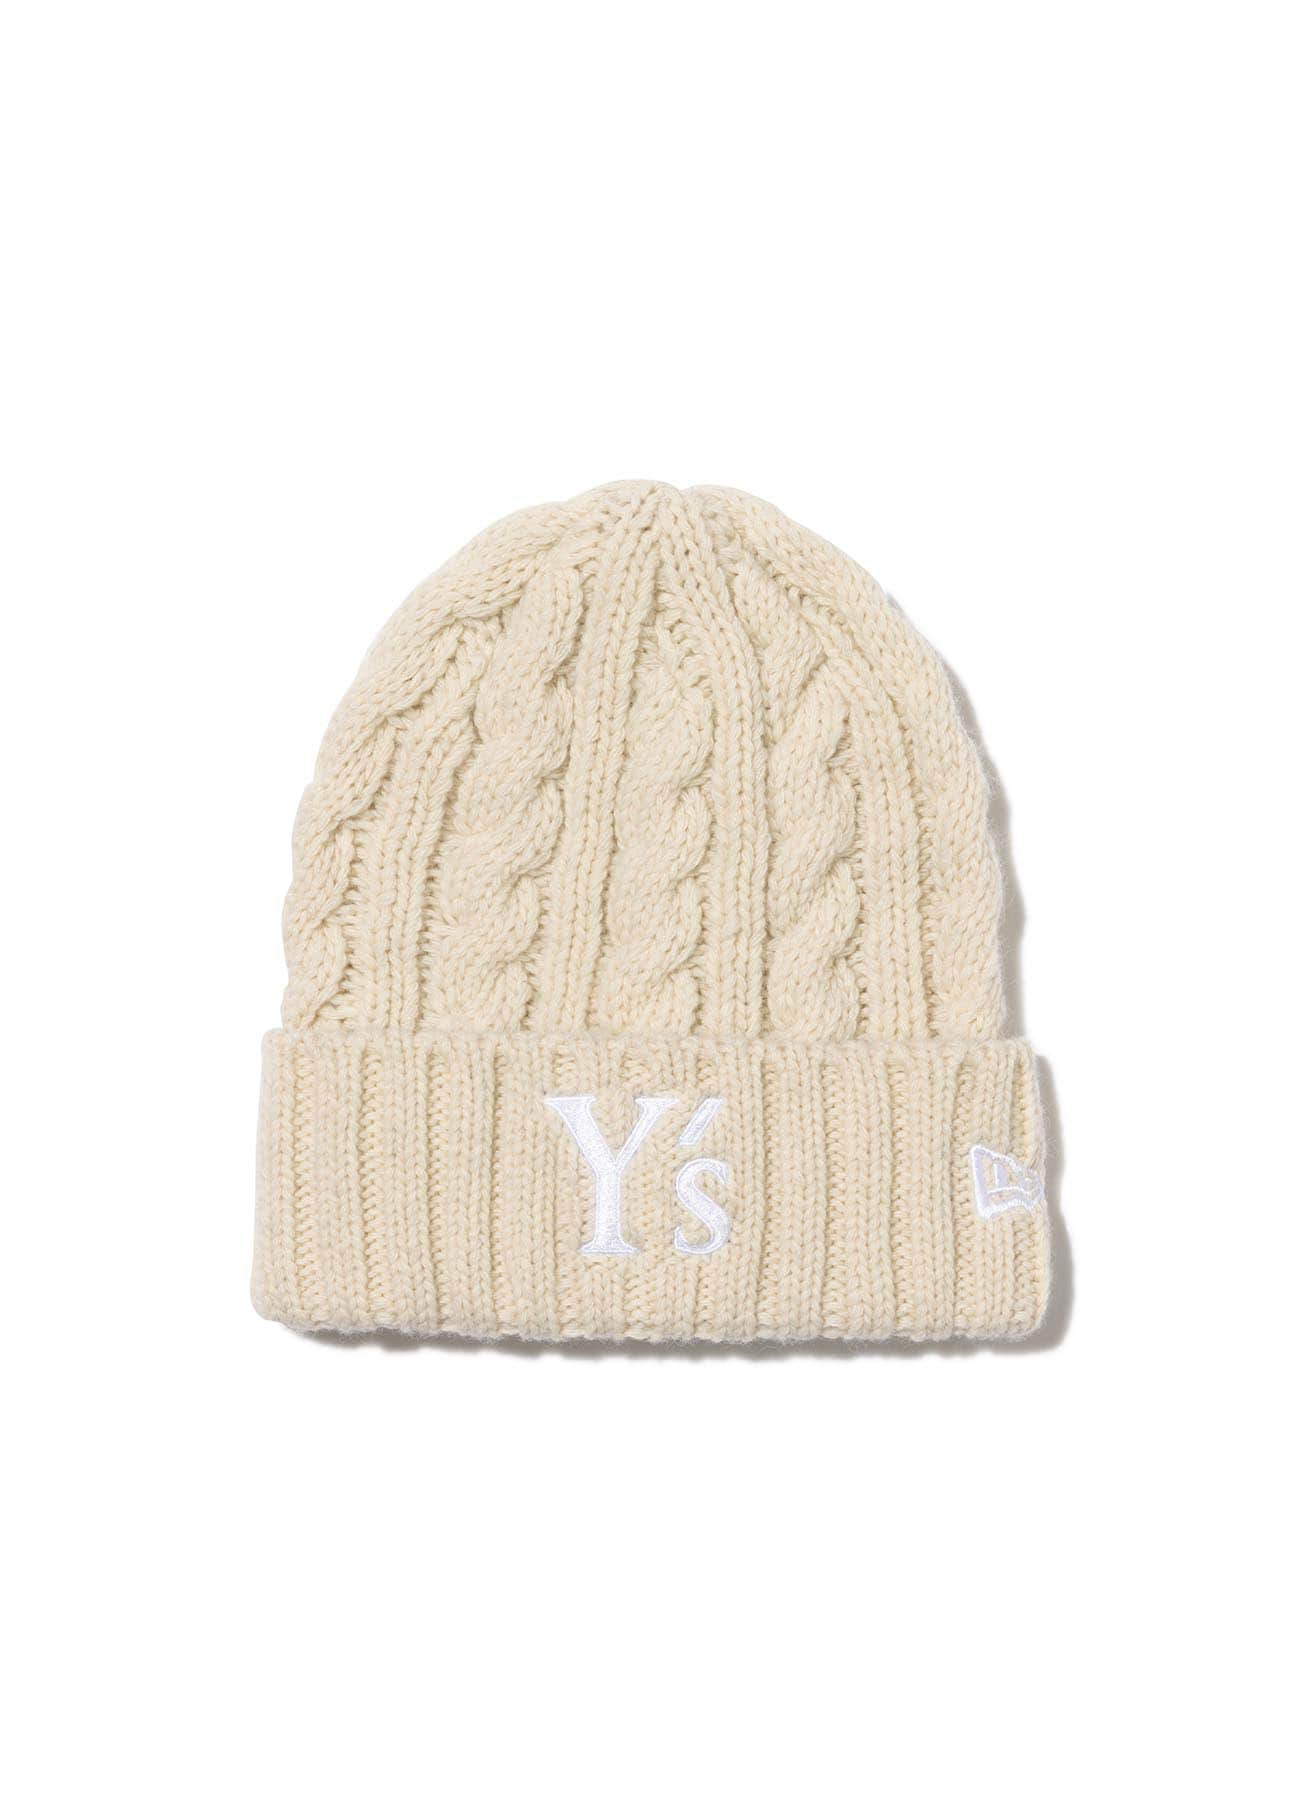 Y's × New Era] LOW GAUGE CUFF KNIT(FREE SIZE Off White): Y's｜THE